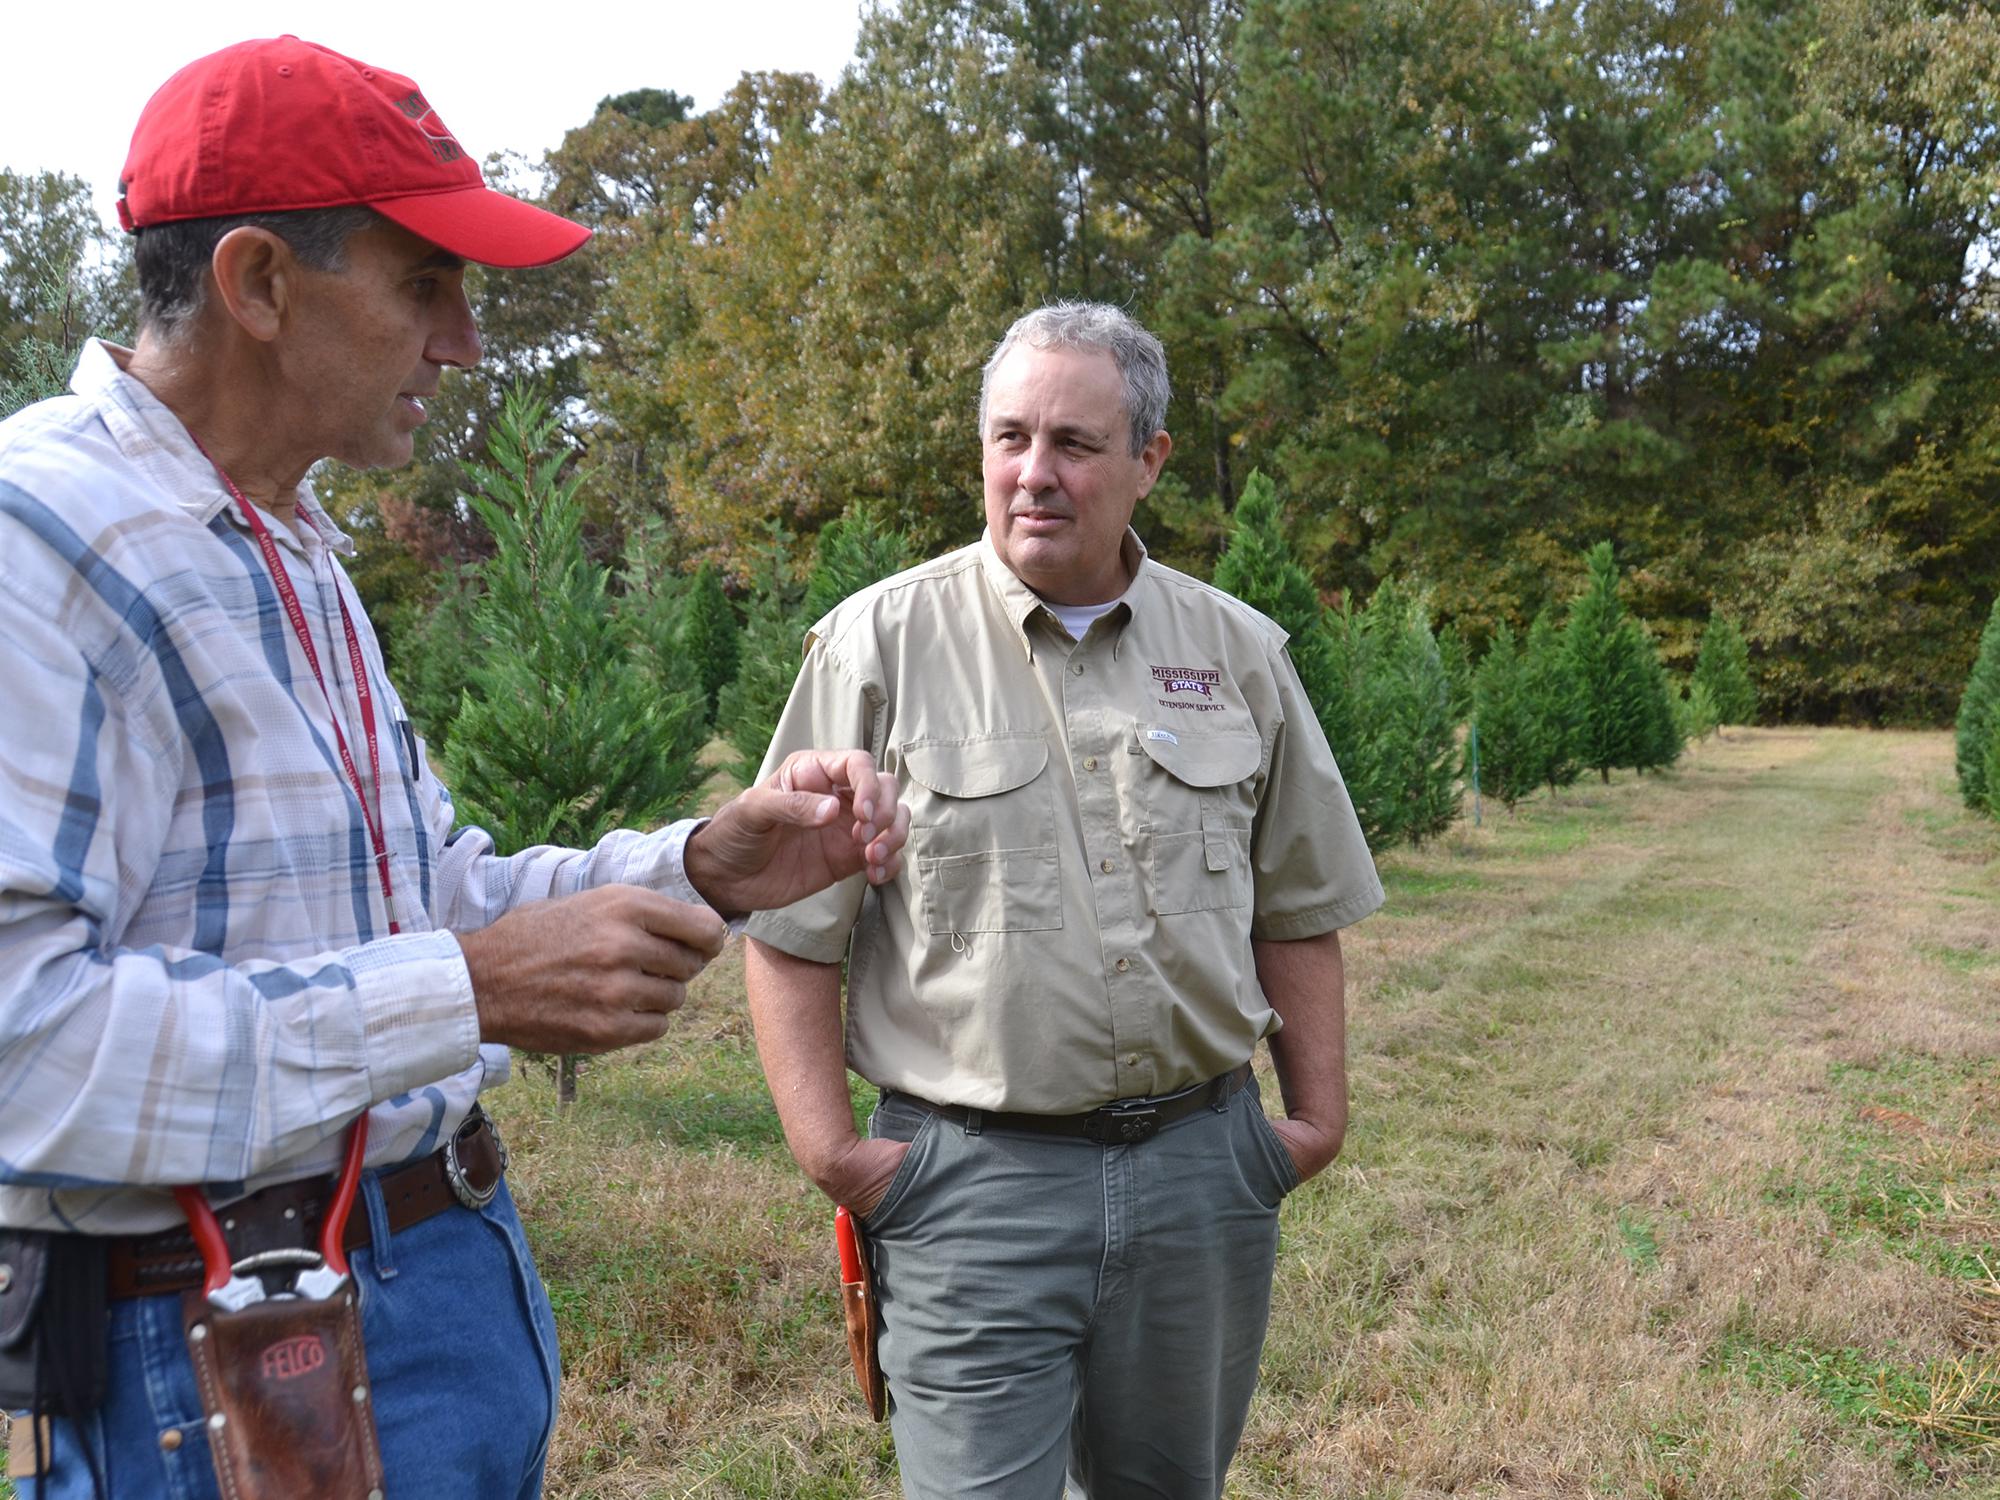 Christmas tree producer Don Kazery Jr., left, discusses agricultural practices on his Hinds County farm with Stephen Dicke, a forestry professor with the Mississippi State University Extension Service, on Nov. 6, 2014. Harsh weather conditions in 2014 and several years of high demand reduced the number of trees available in heavily populated counties. (Photo by MSU Ag Communications/Susan Collins-Smith)